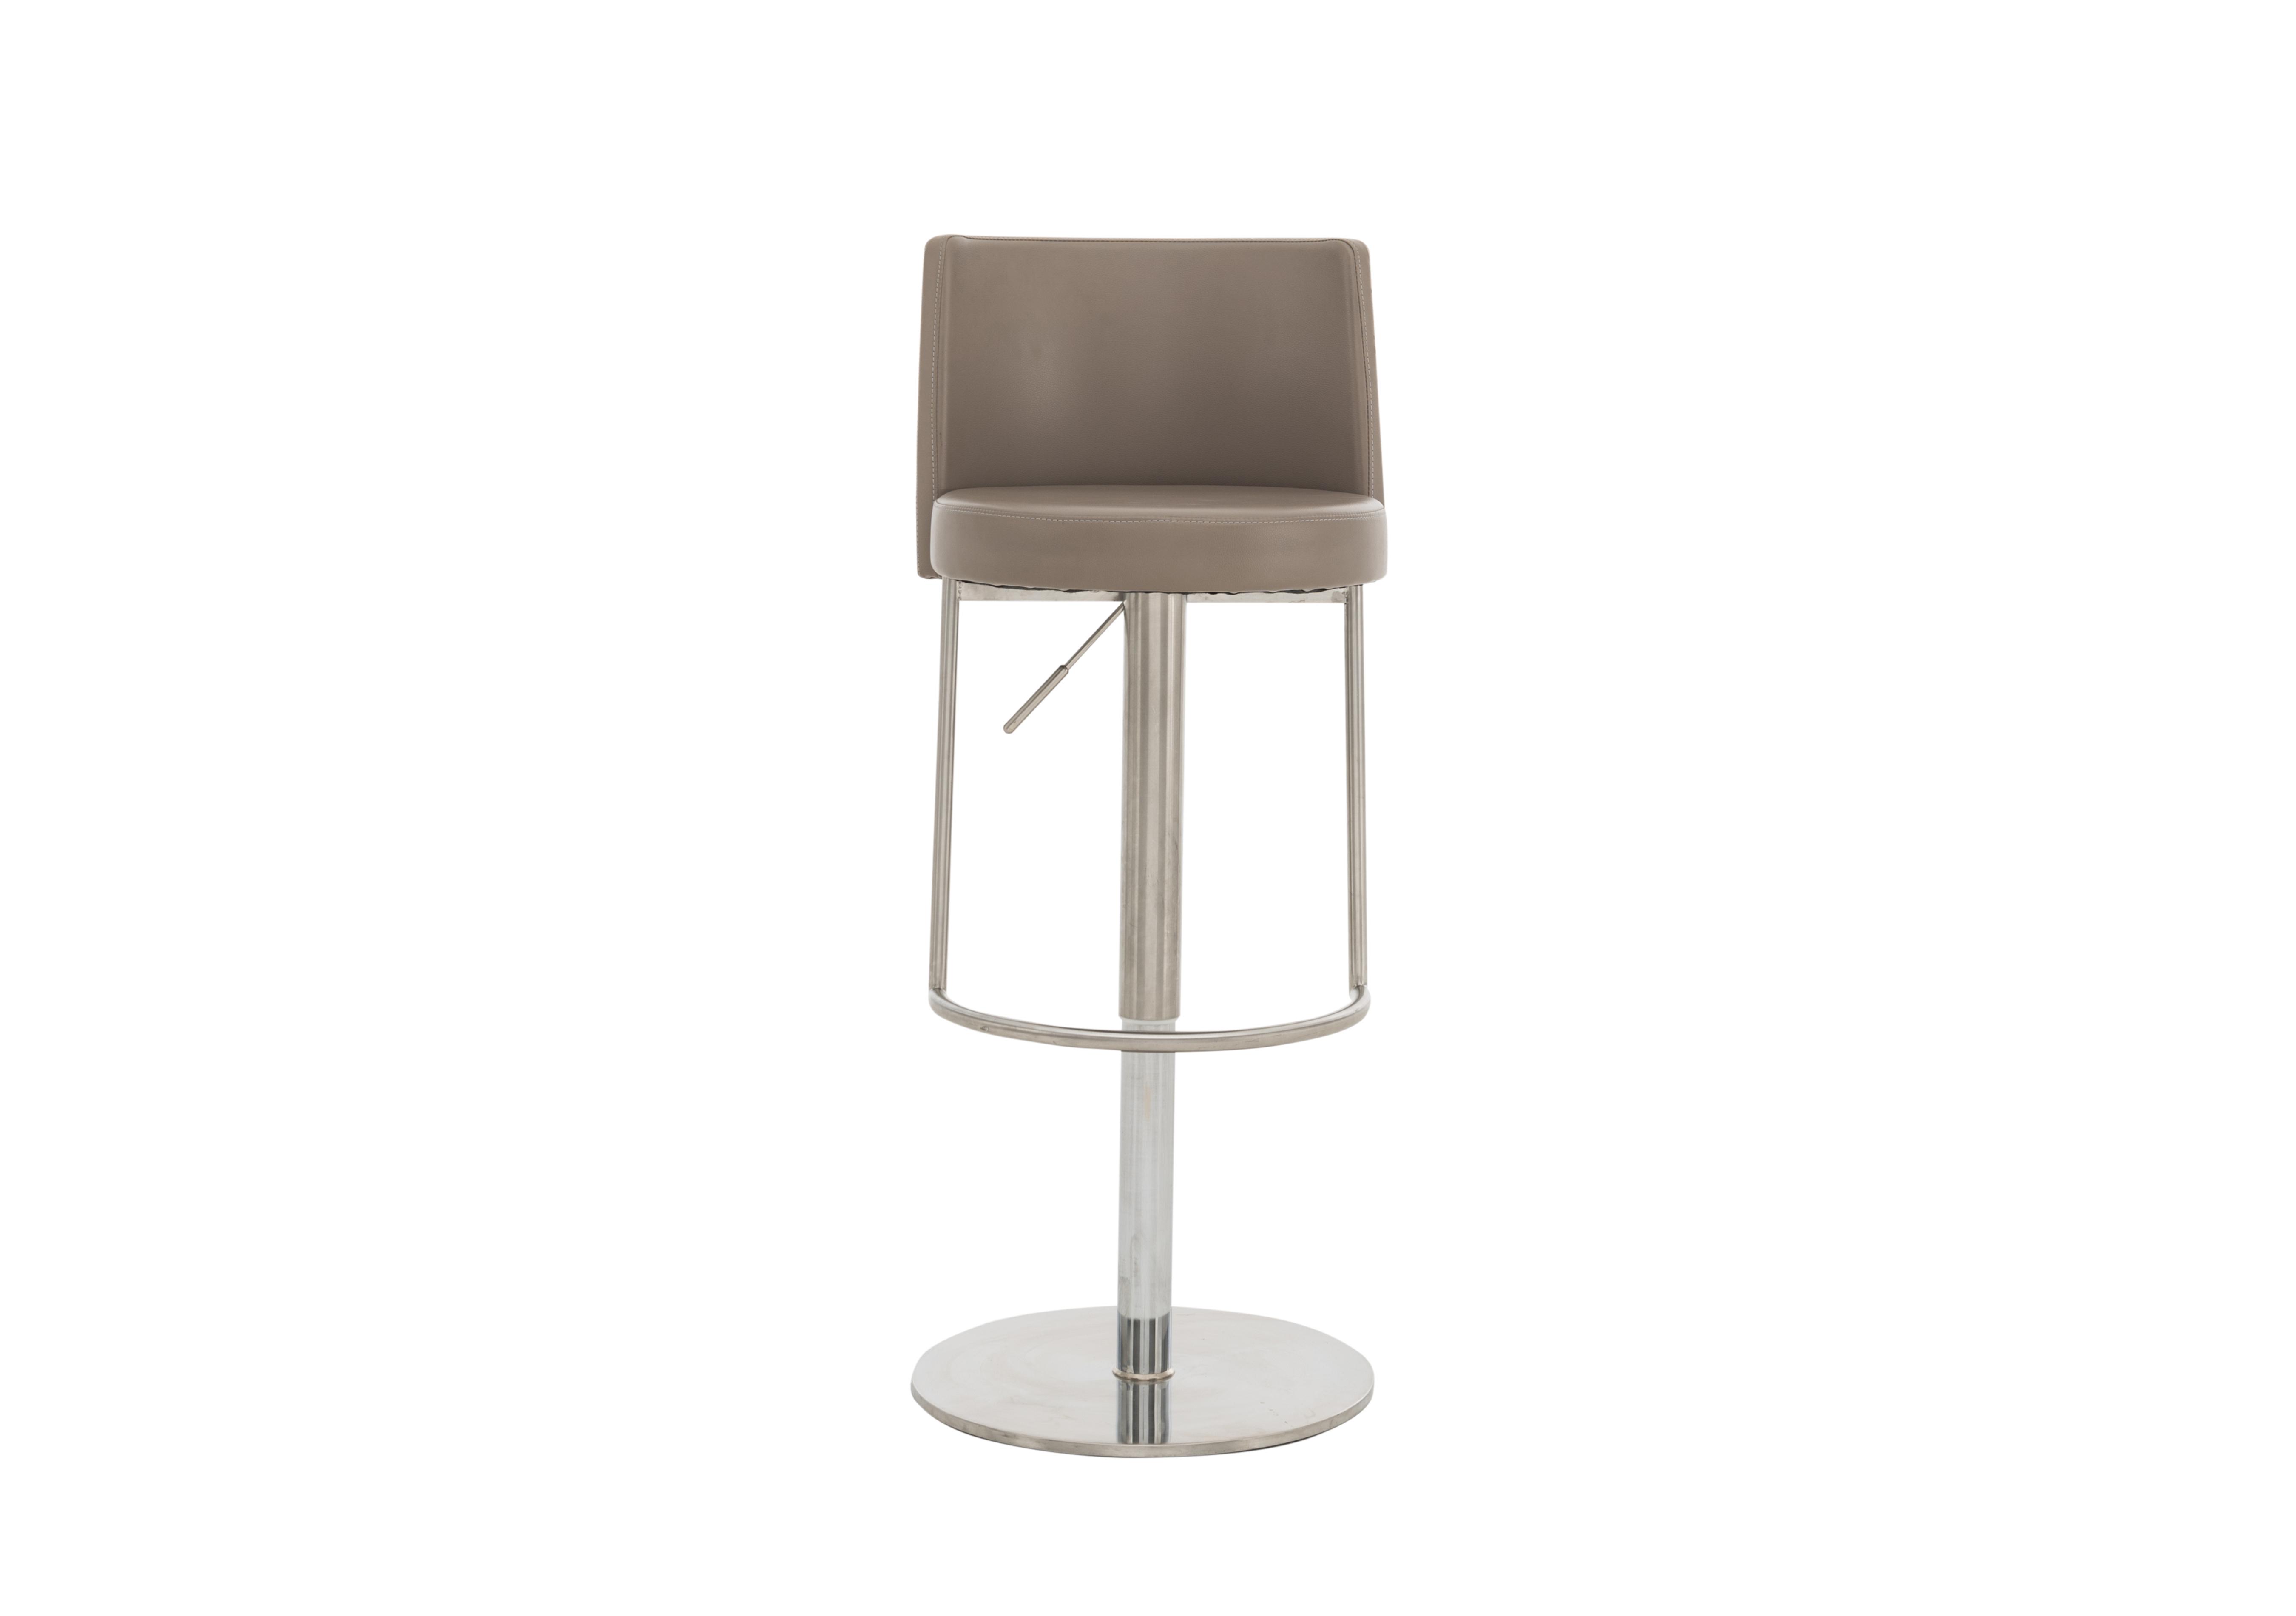 Monza Bar Stool in Taupe on Furniture Village